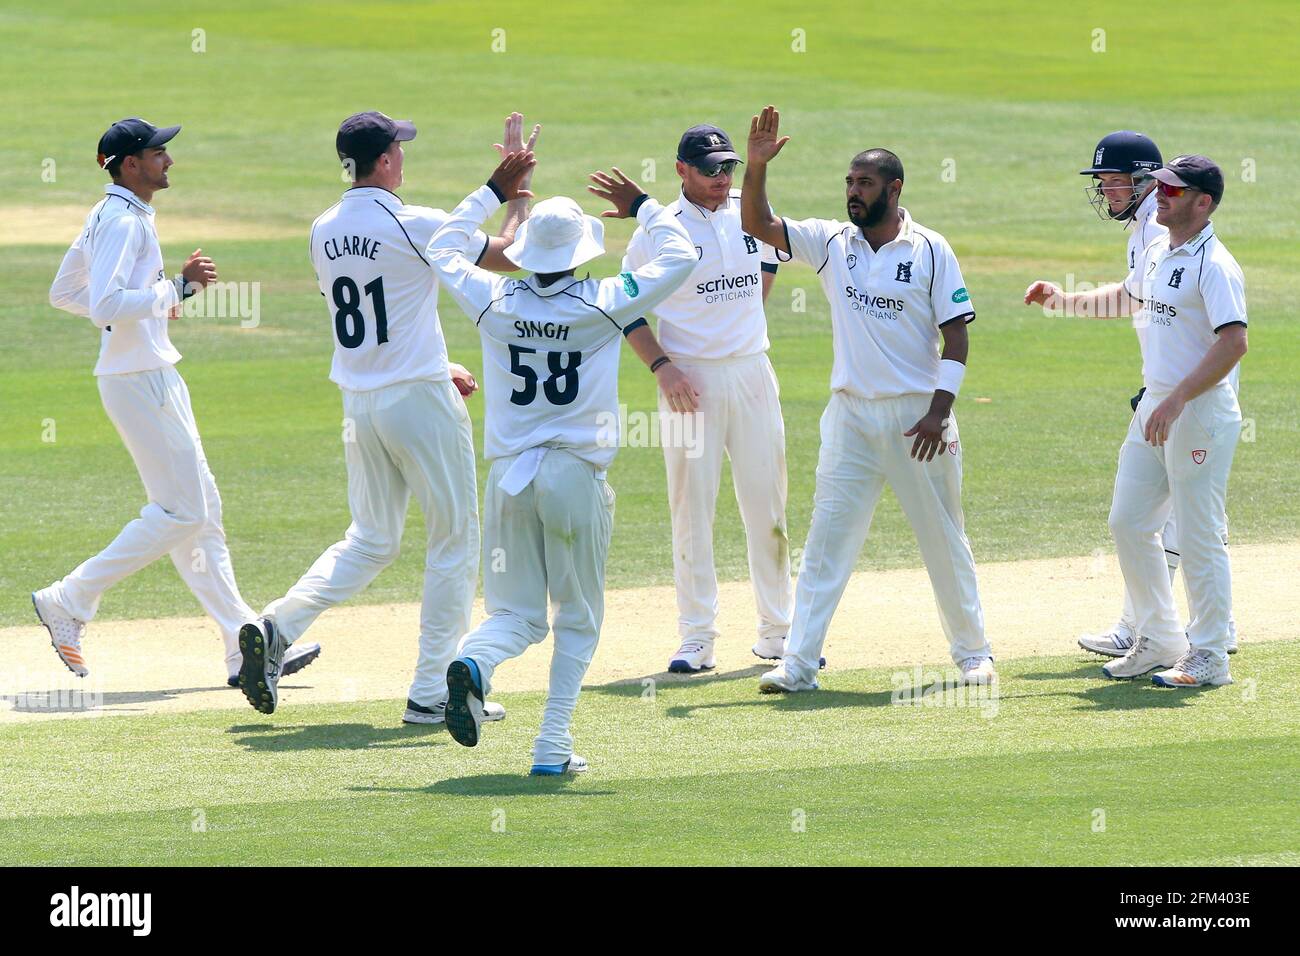 Jeetan Patel of Warwickshire is congratulated by his team mates after taking the wicket of Tom Westley during Essex CCC vs Warwickshire CCC, Specsaver Stock Photo